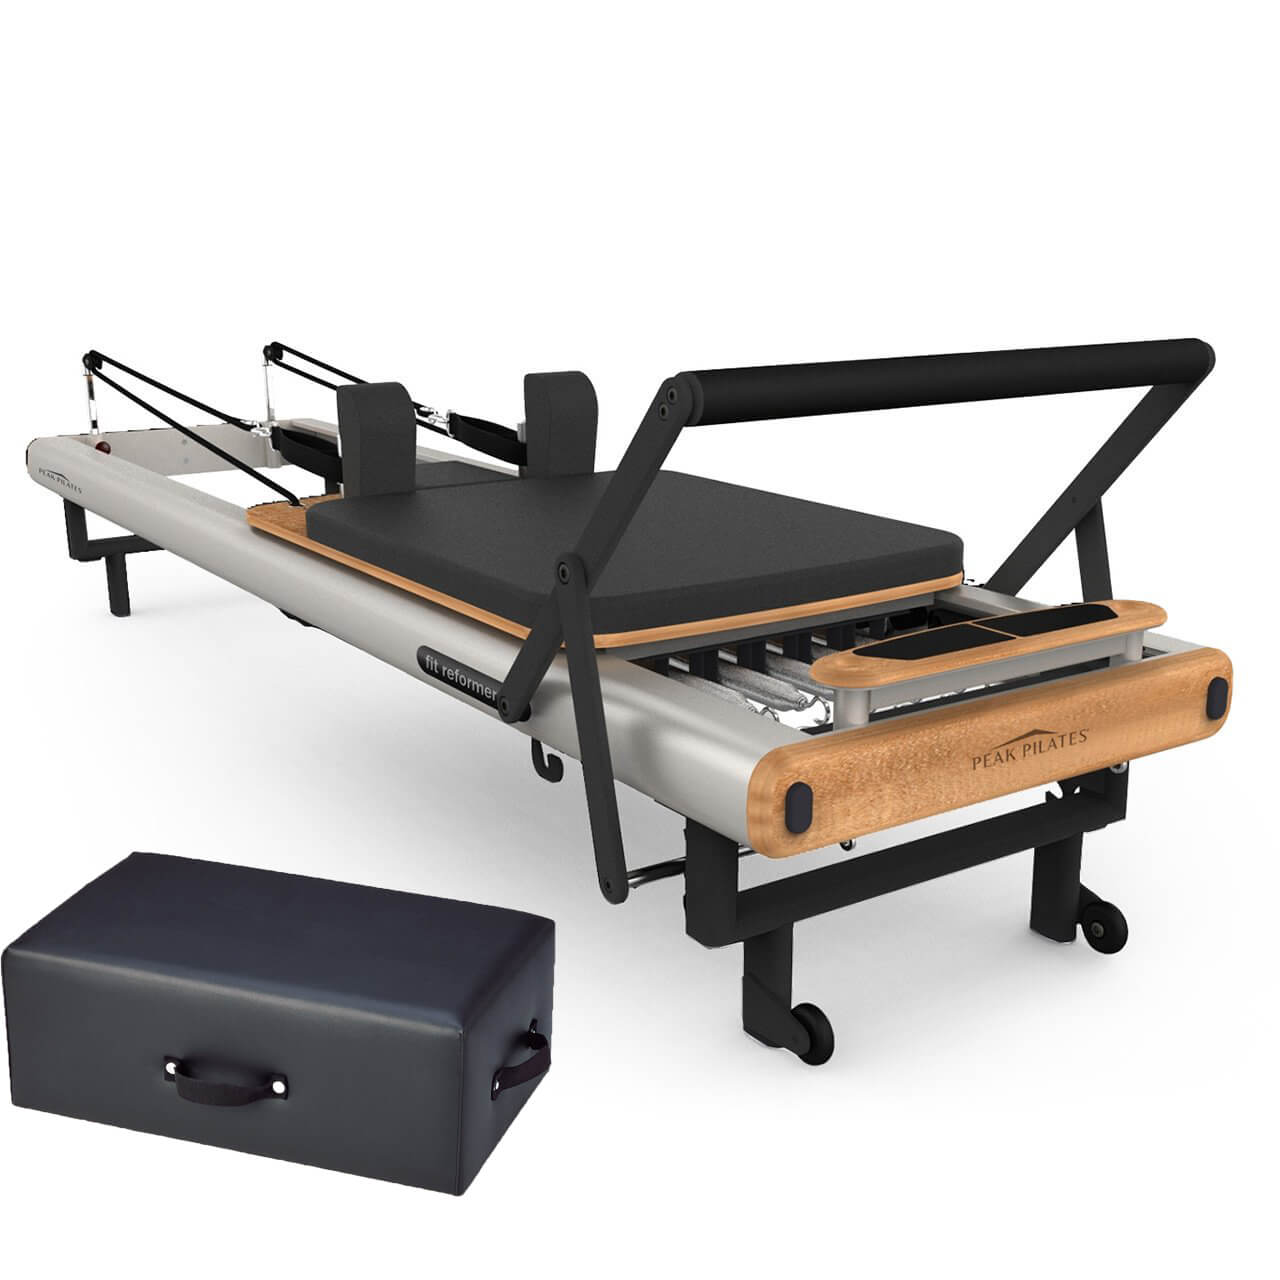 Buy Peak Pilates Fit Reformer Machine with Free Shipping